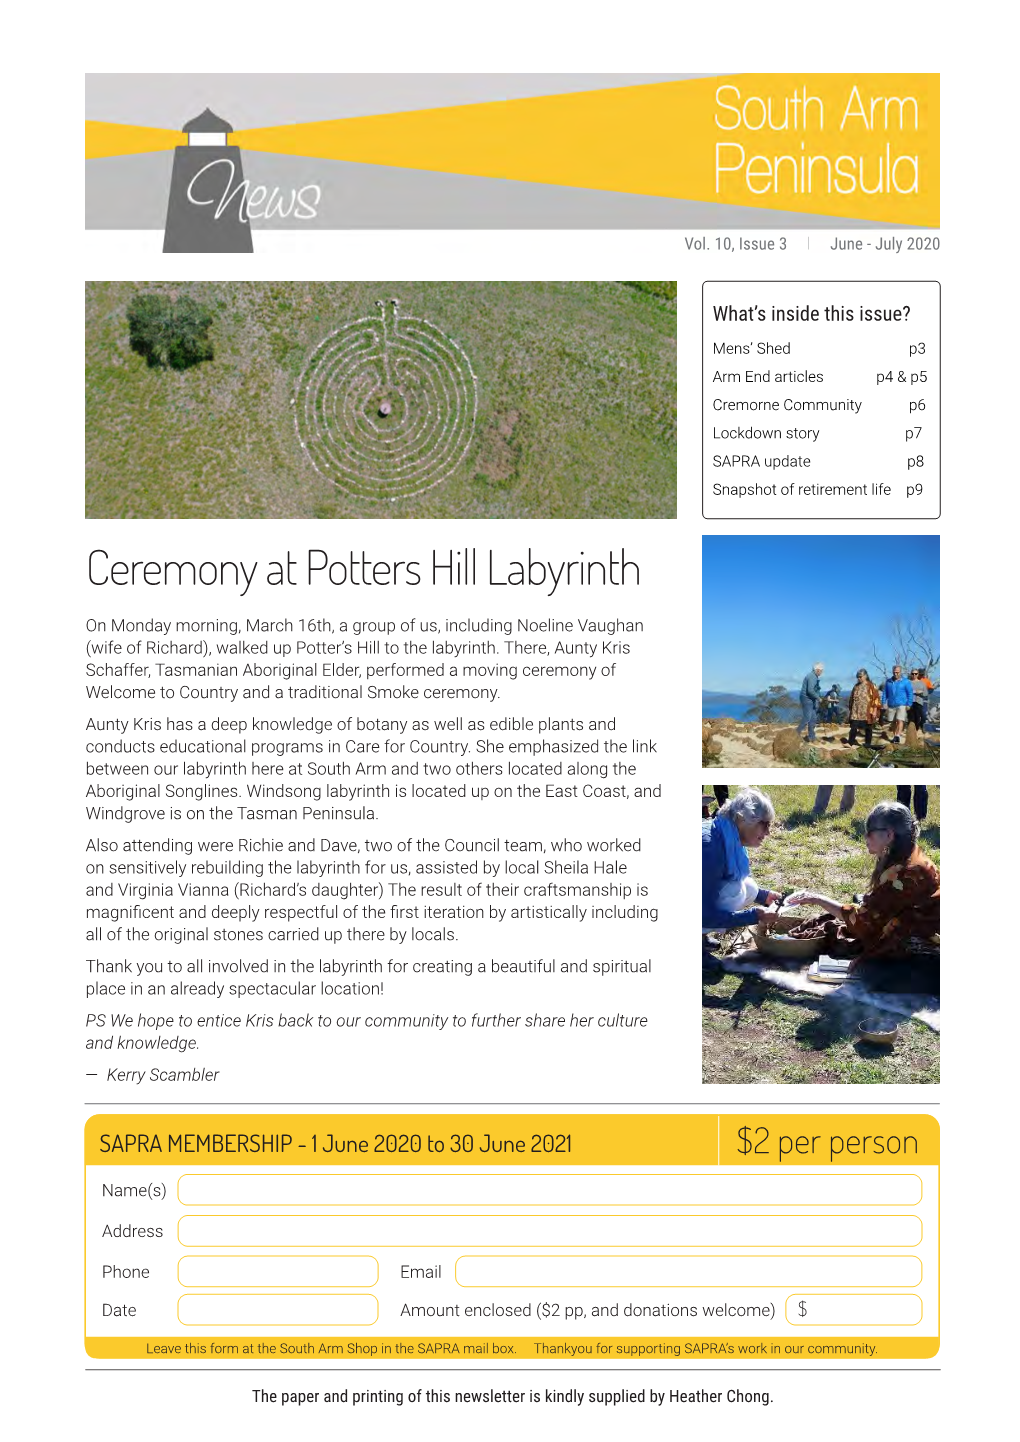 Ceremony at Potters Hill Labyrinth